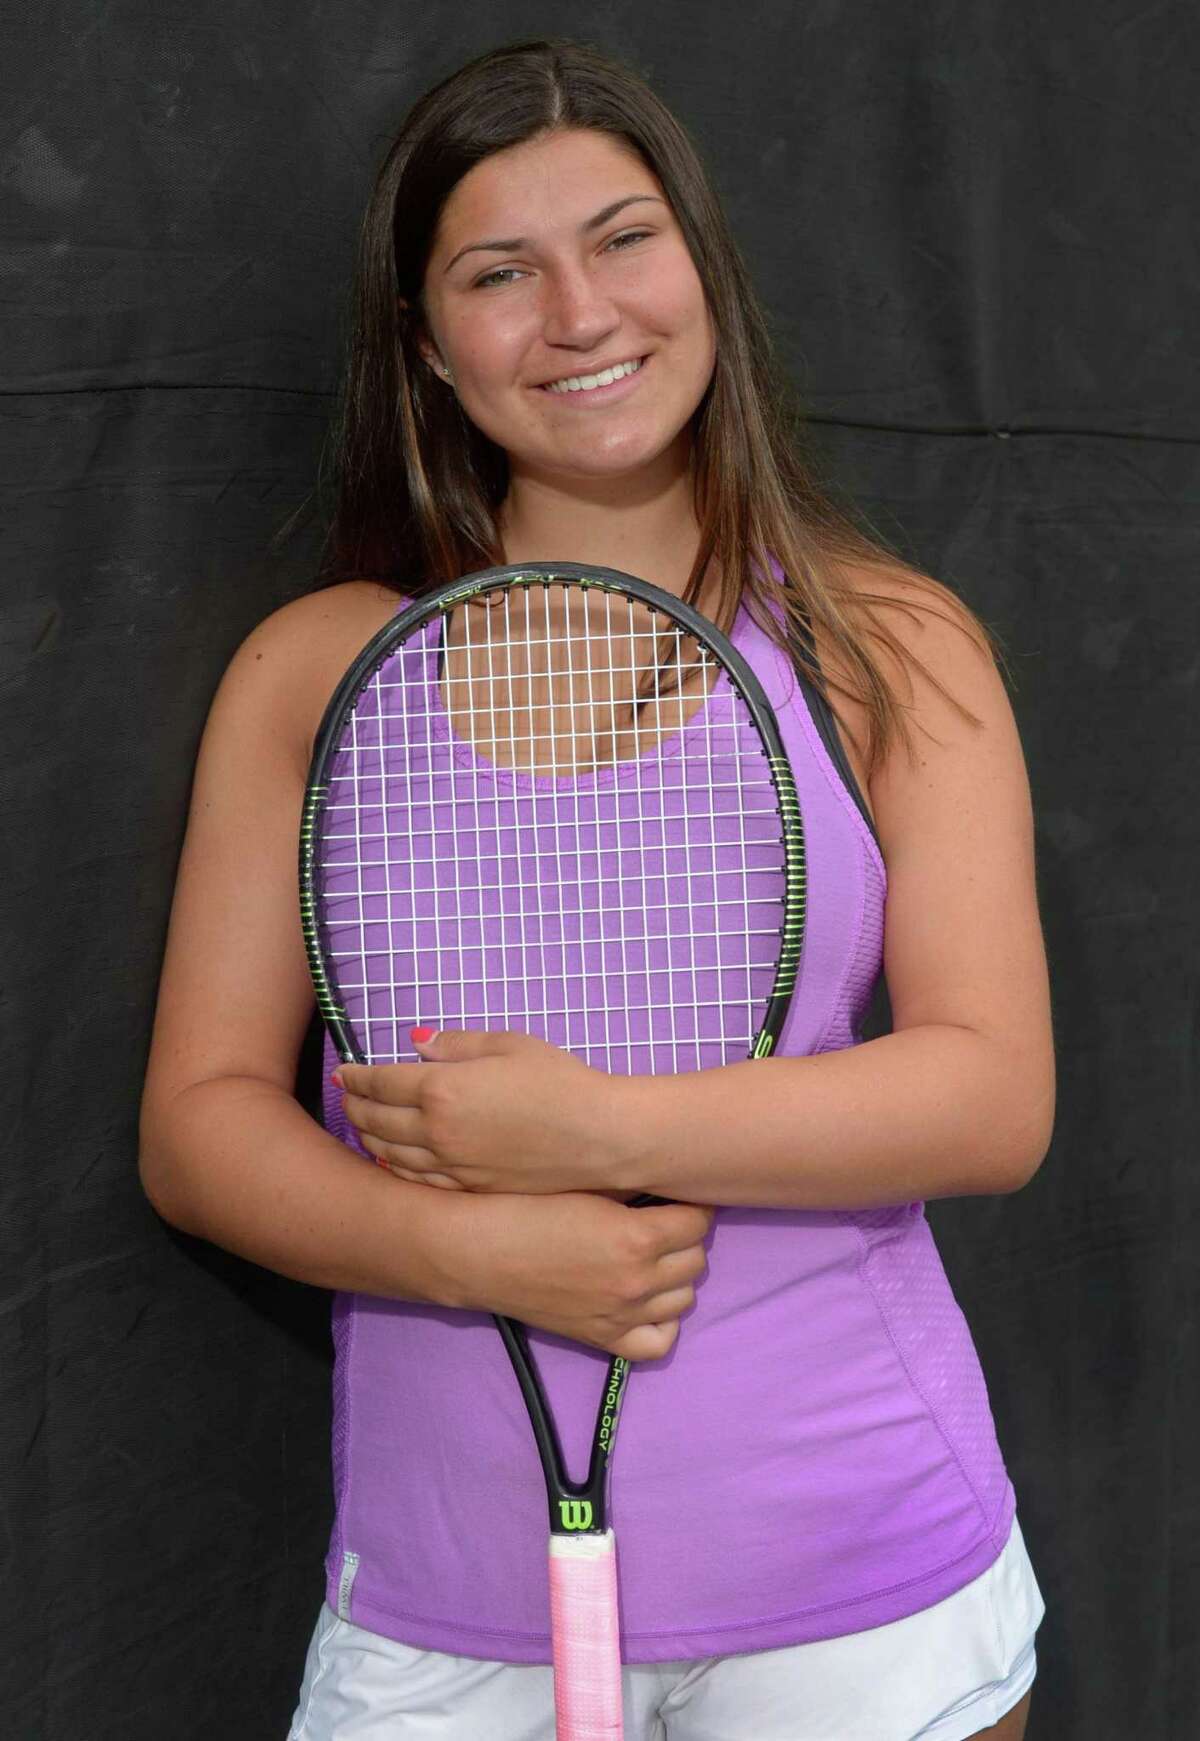 Weston High graduate Cayla Koch, Hearst All-Stars Girls Tennis Player of the Year, Wednesday, July 12, 2017, at the Weston High School tennis courts in Weston, Conn.